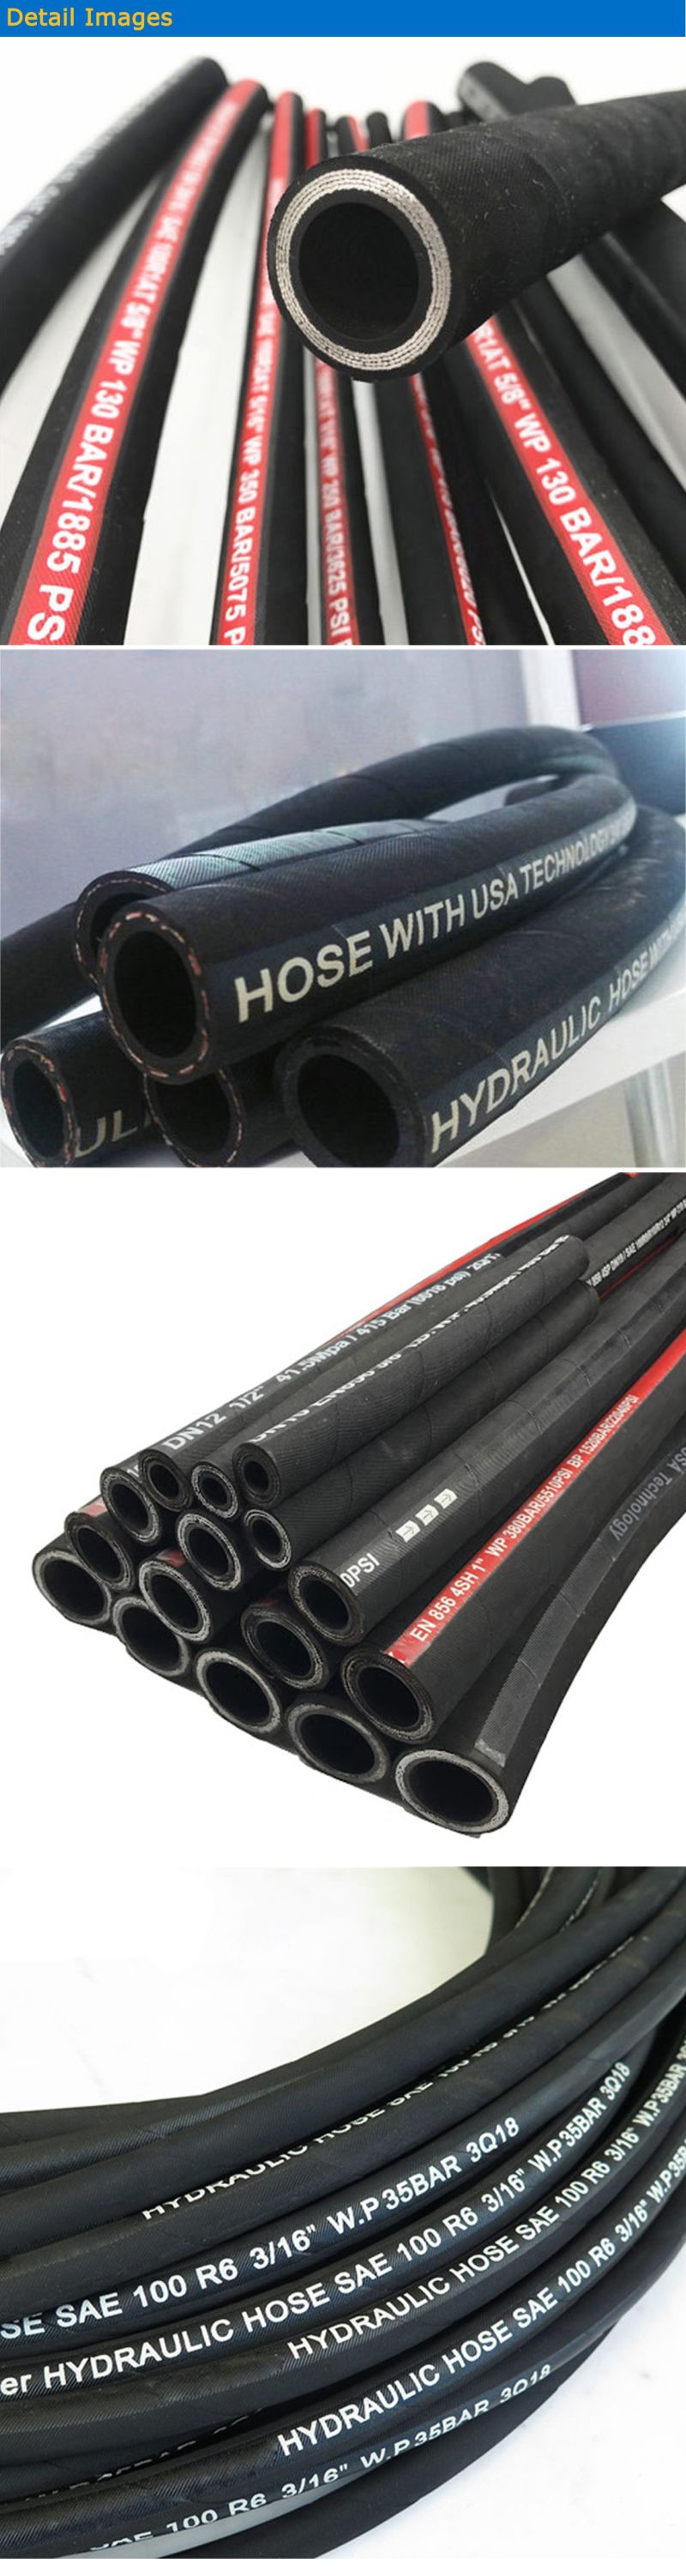 SAE 100r2at Hydraulic Hose Stainless Steel Braided Rubber Hose